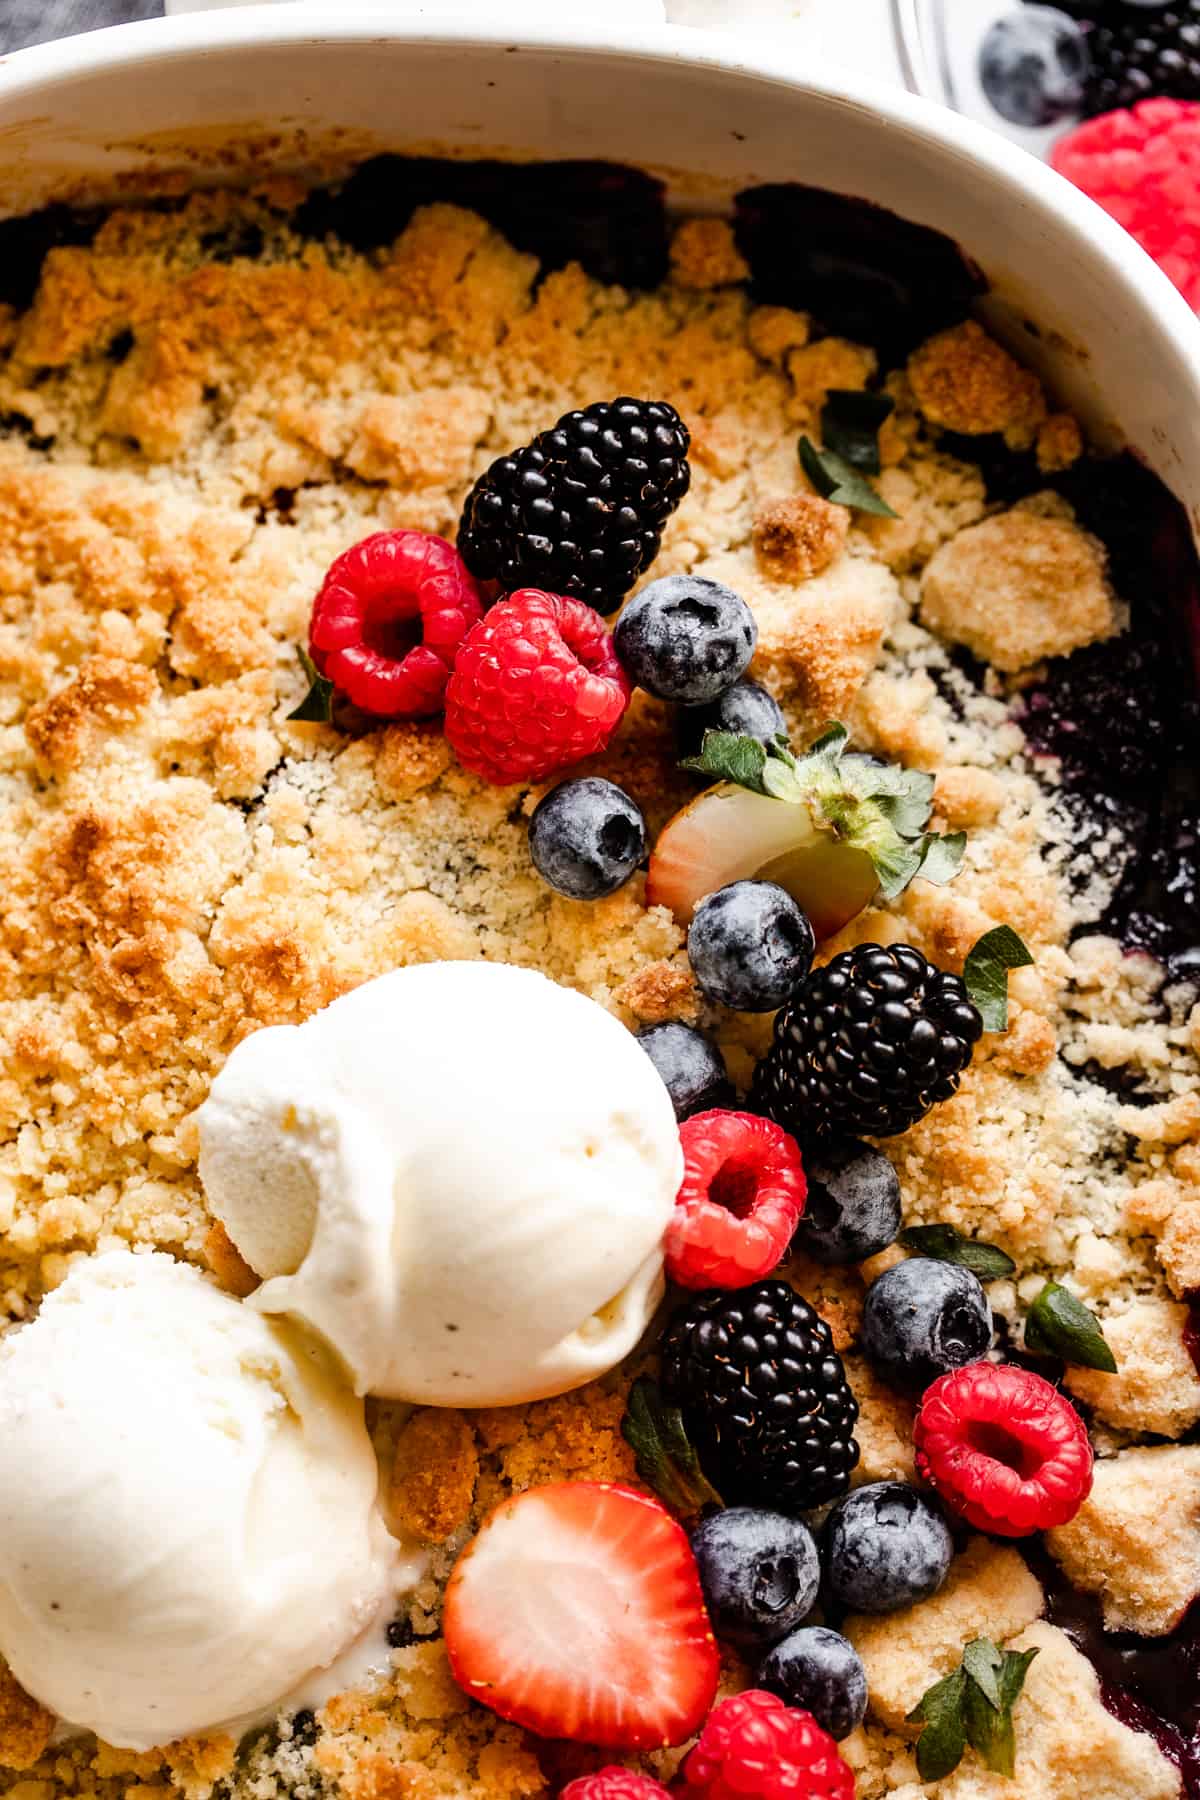 close up shot of fresh berries and two ice cream scoops arranged on top of a crumbly biscuit topping.